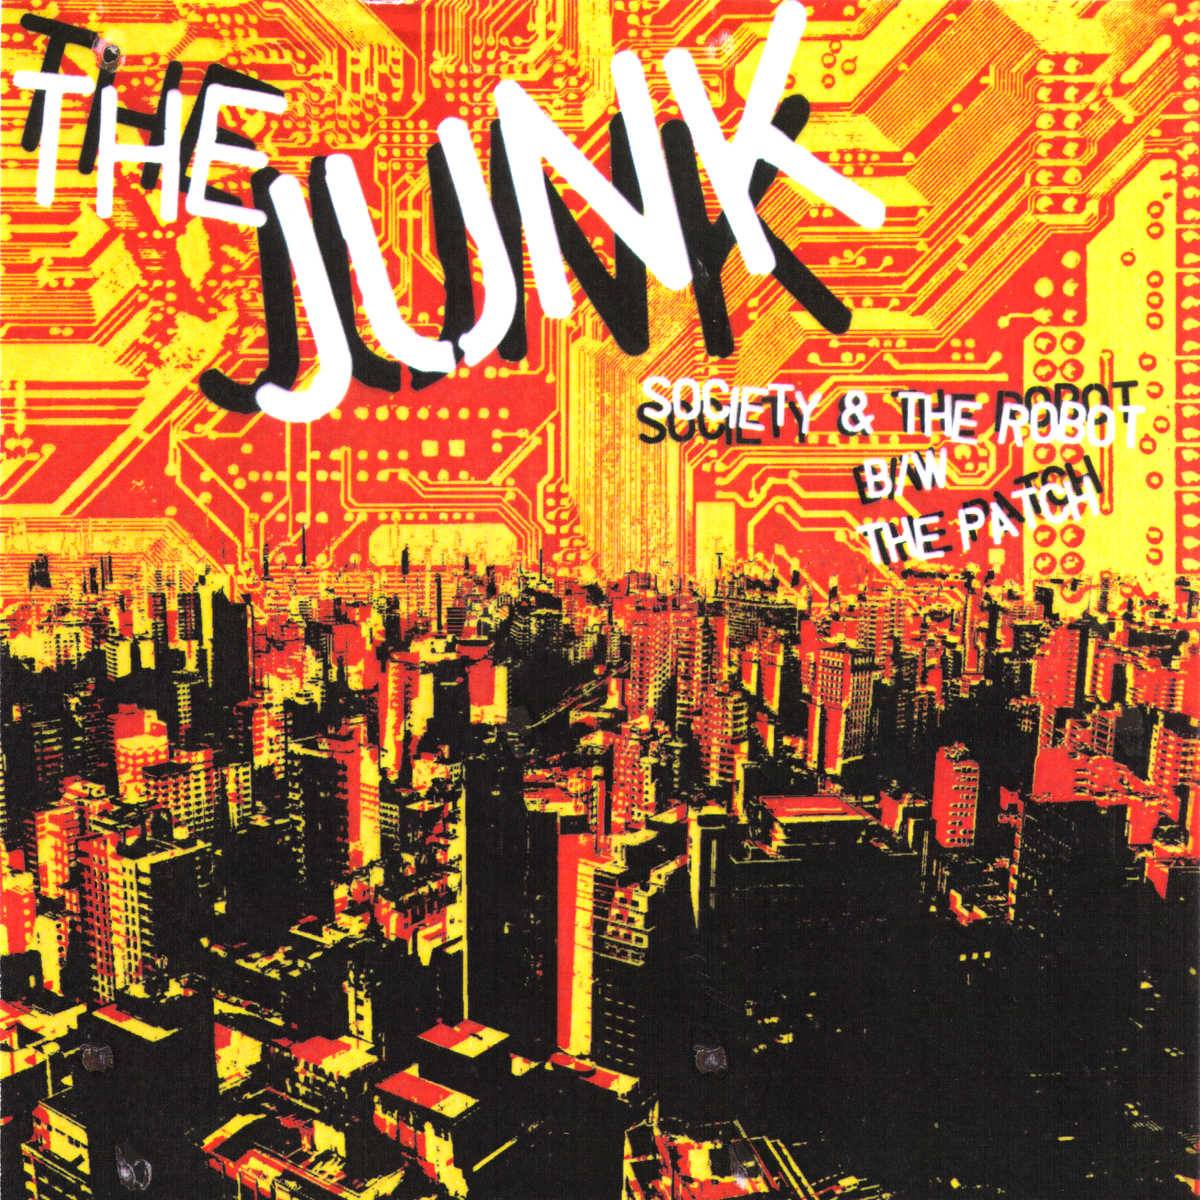 The Junk- Society & The Robot 7” ~EX SMUT PEDDLERS / RAREST COVER + STICKER!